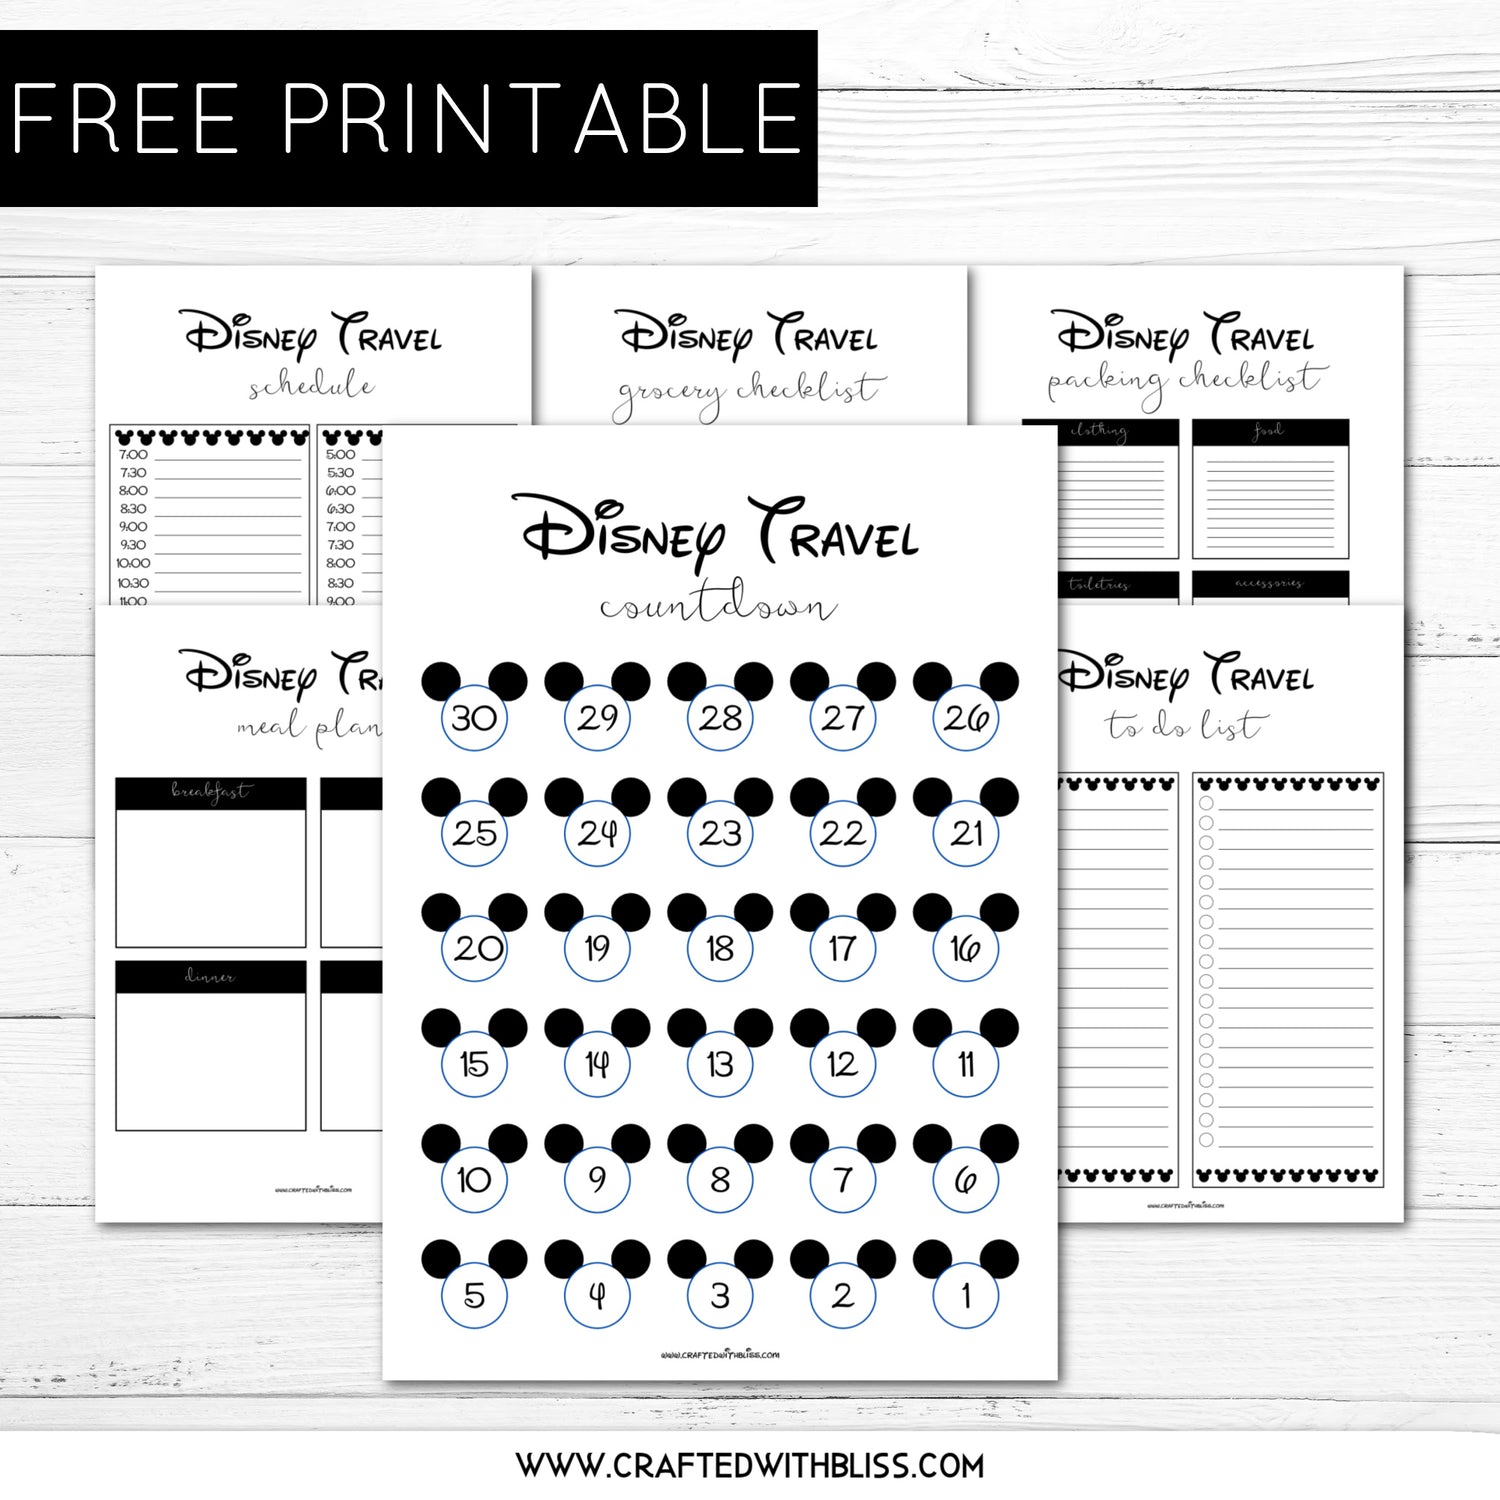 Free Disney Planner Printable CraftedwithBliss